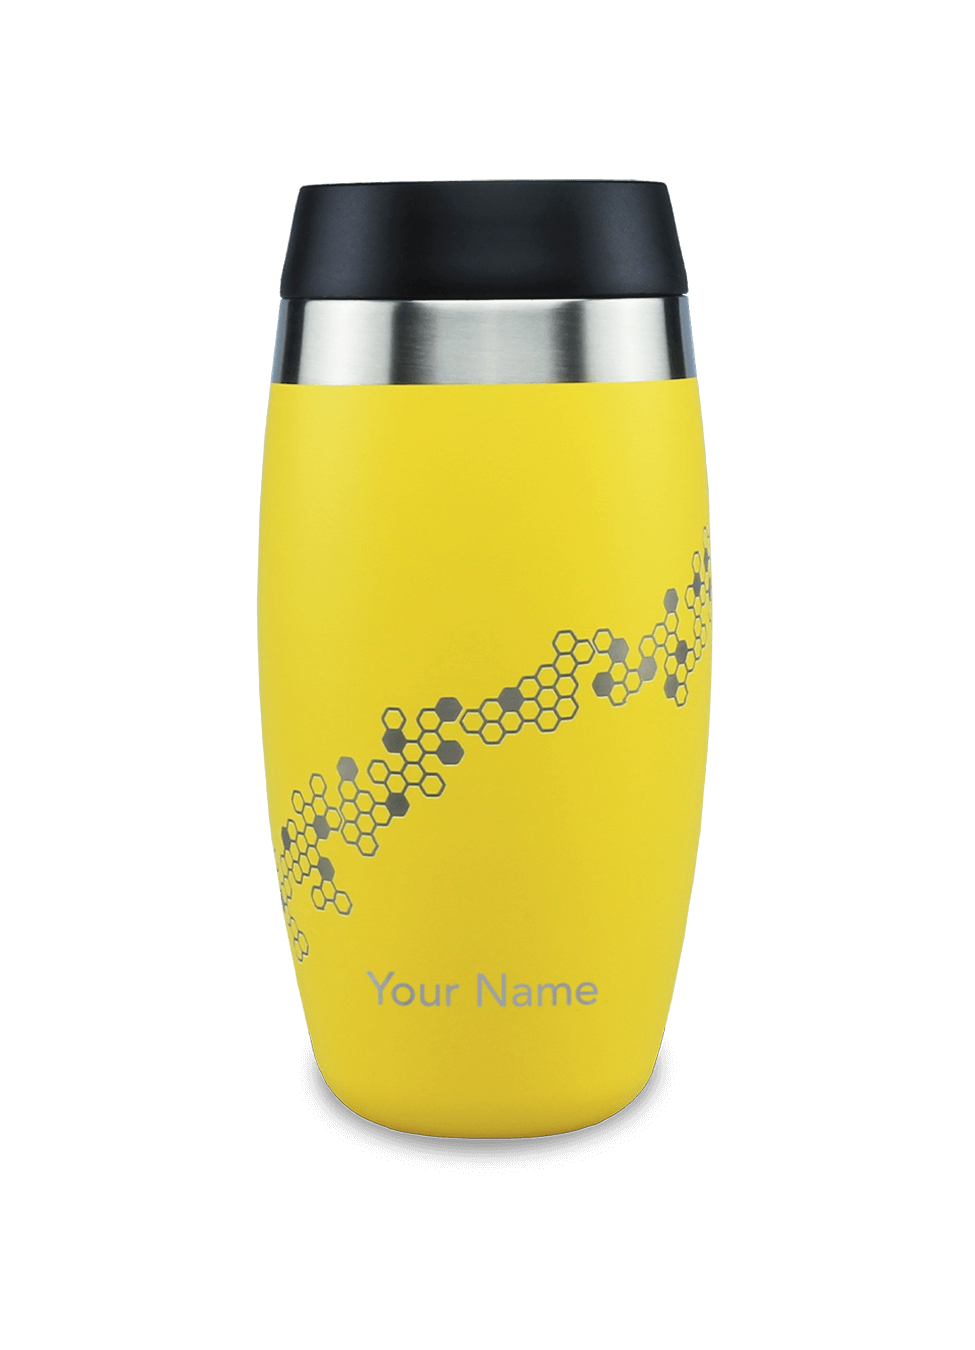 Personalised coffee flask in yellow with bee design